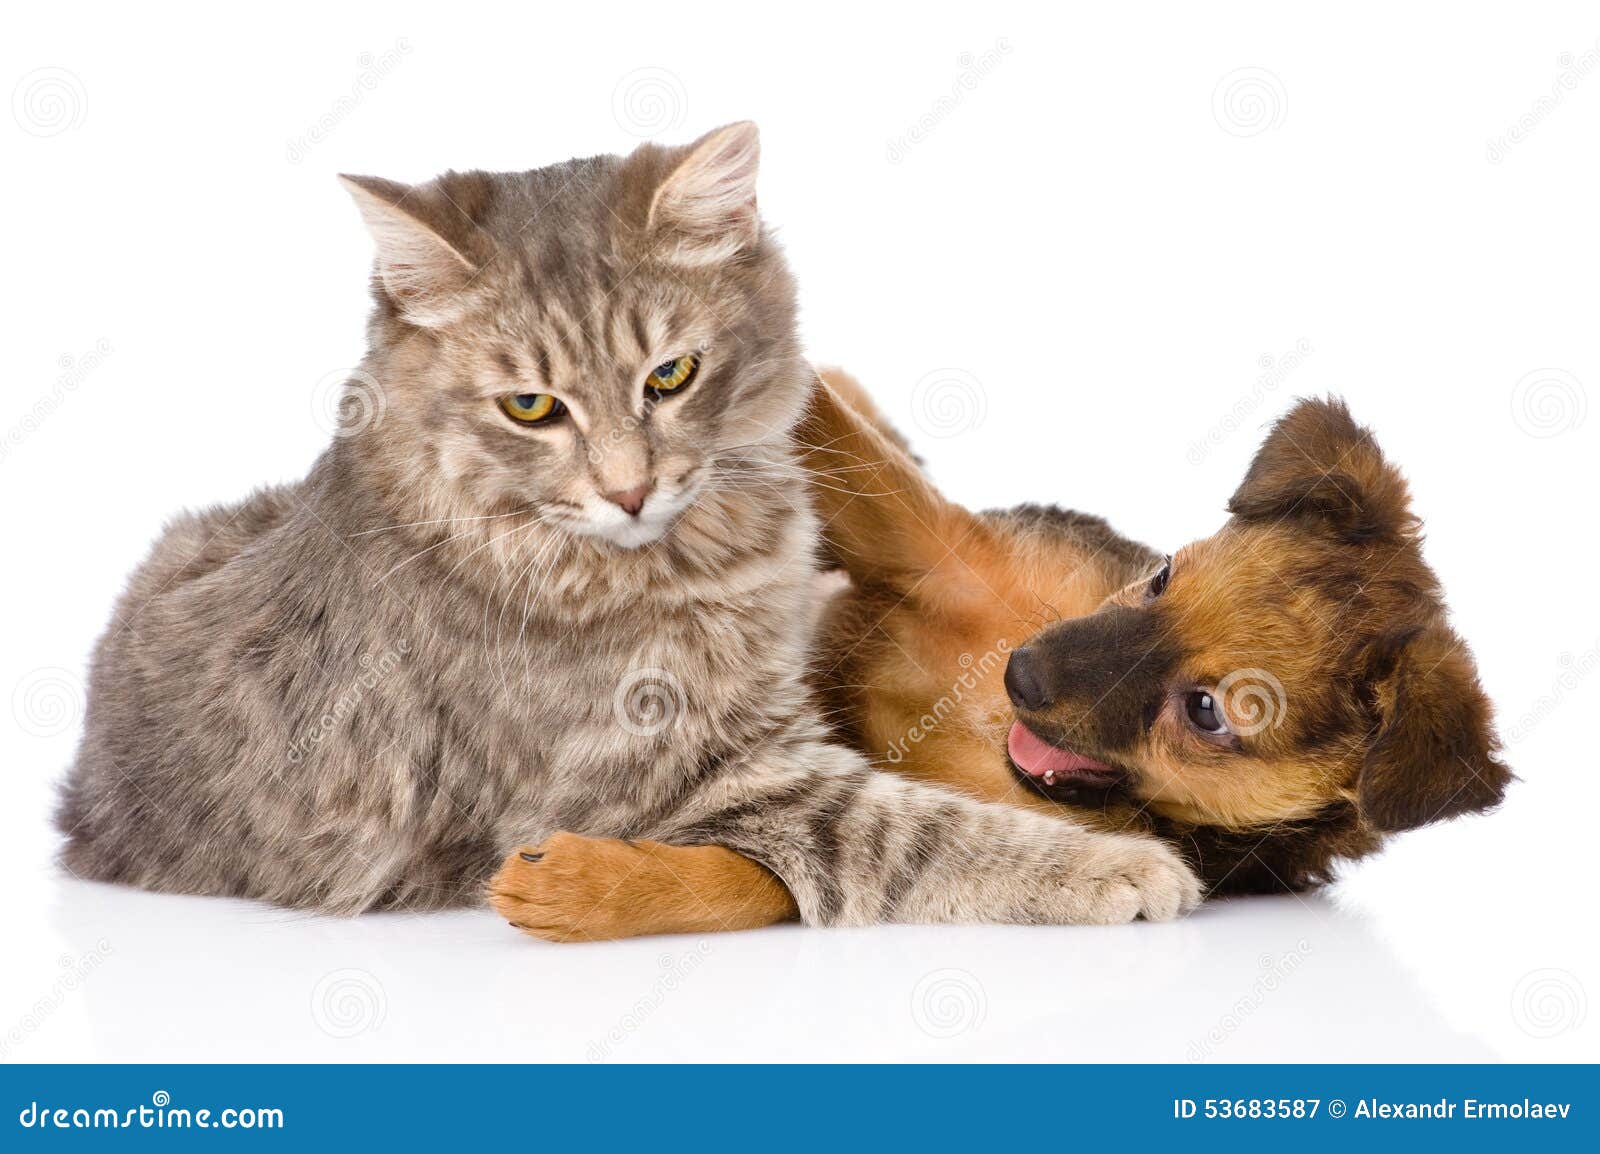 cat and dog fights.  on white background